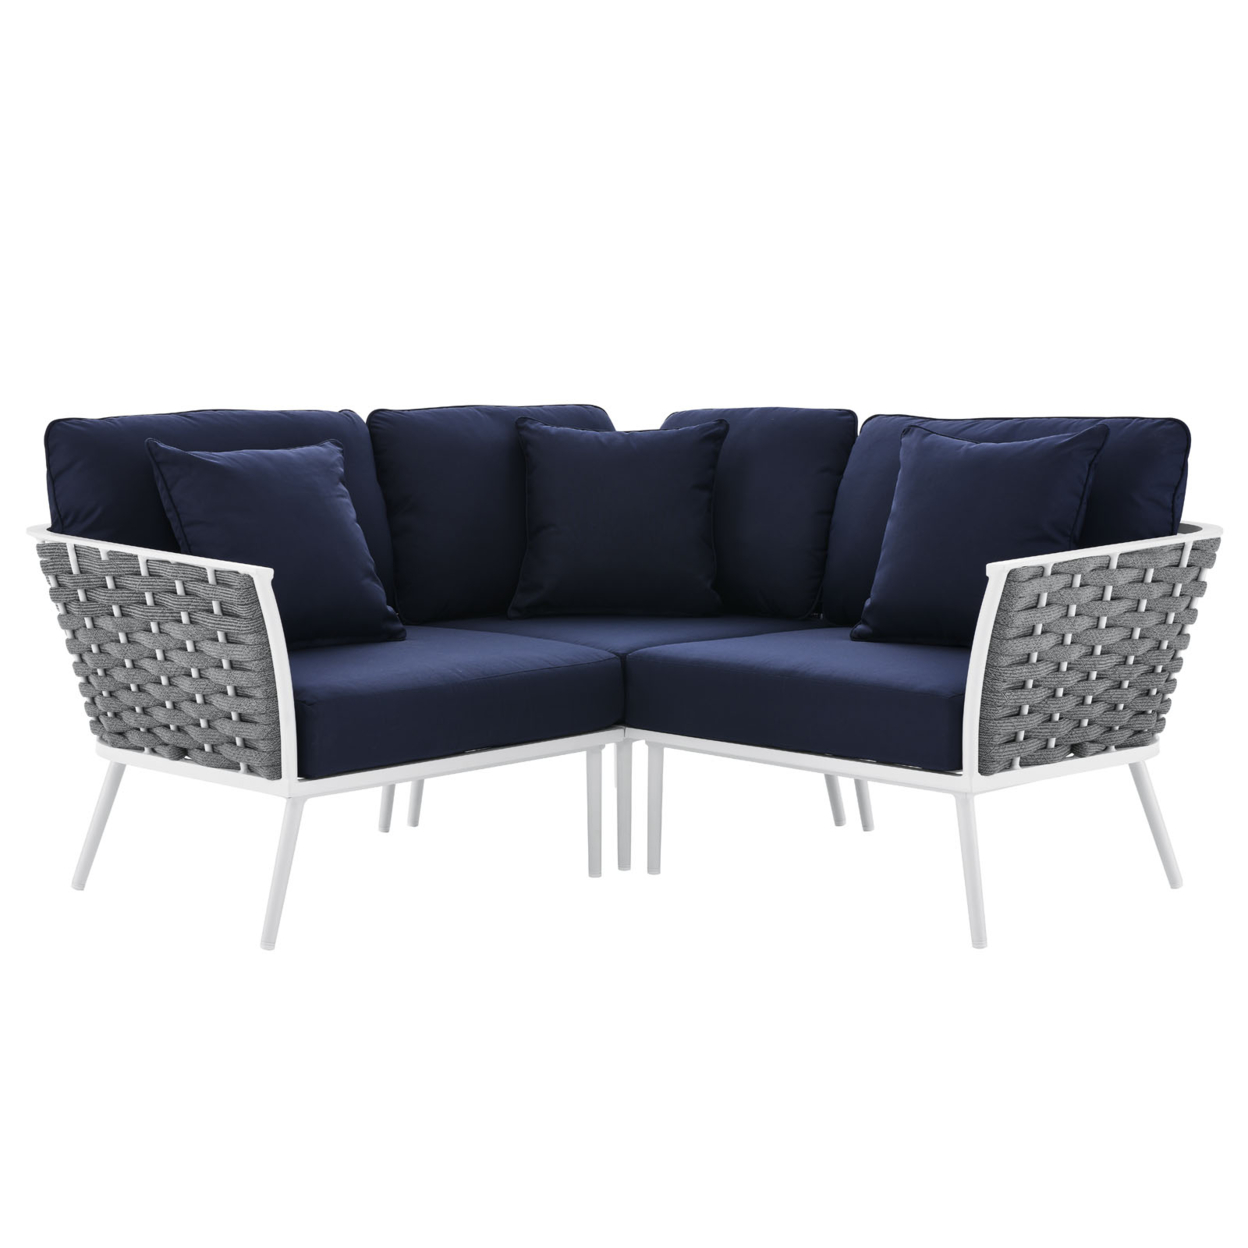 Stance Outdoor Patio Aluminum Small Sectional Sofa, White Navy